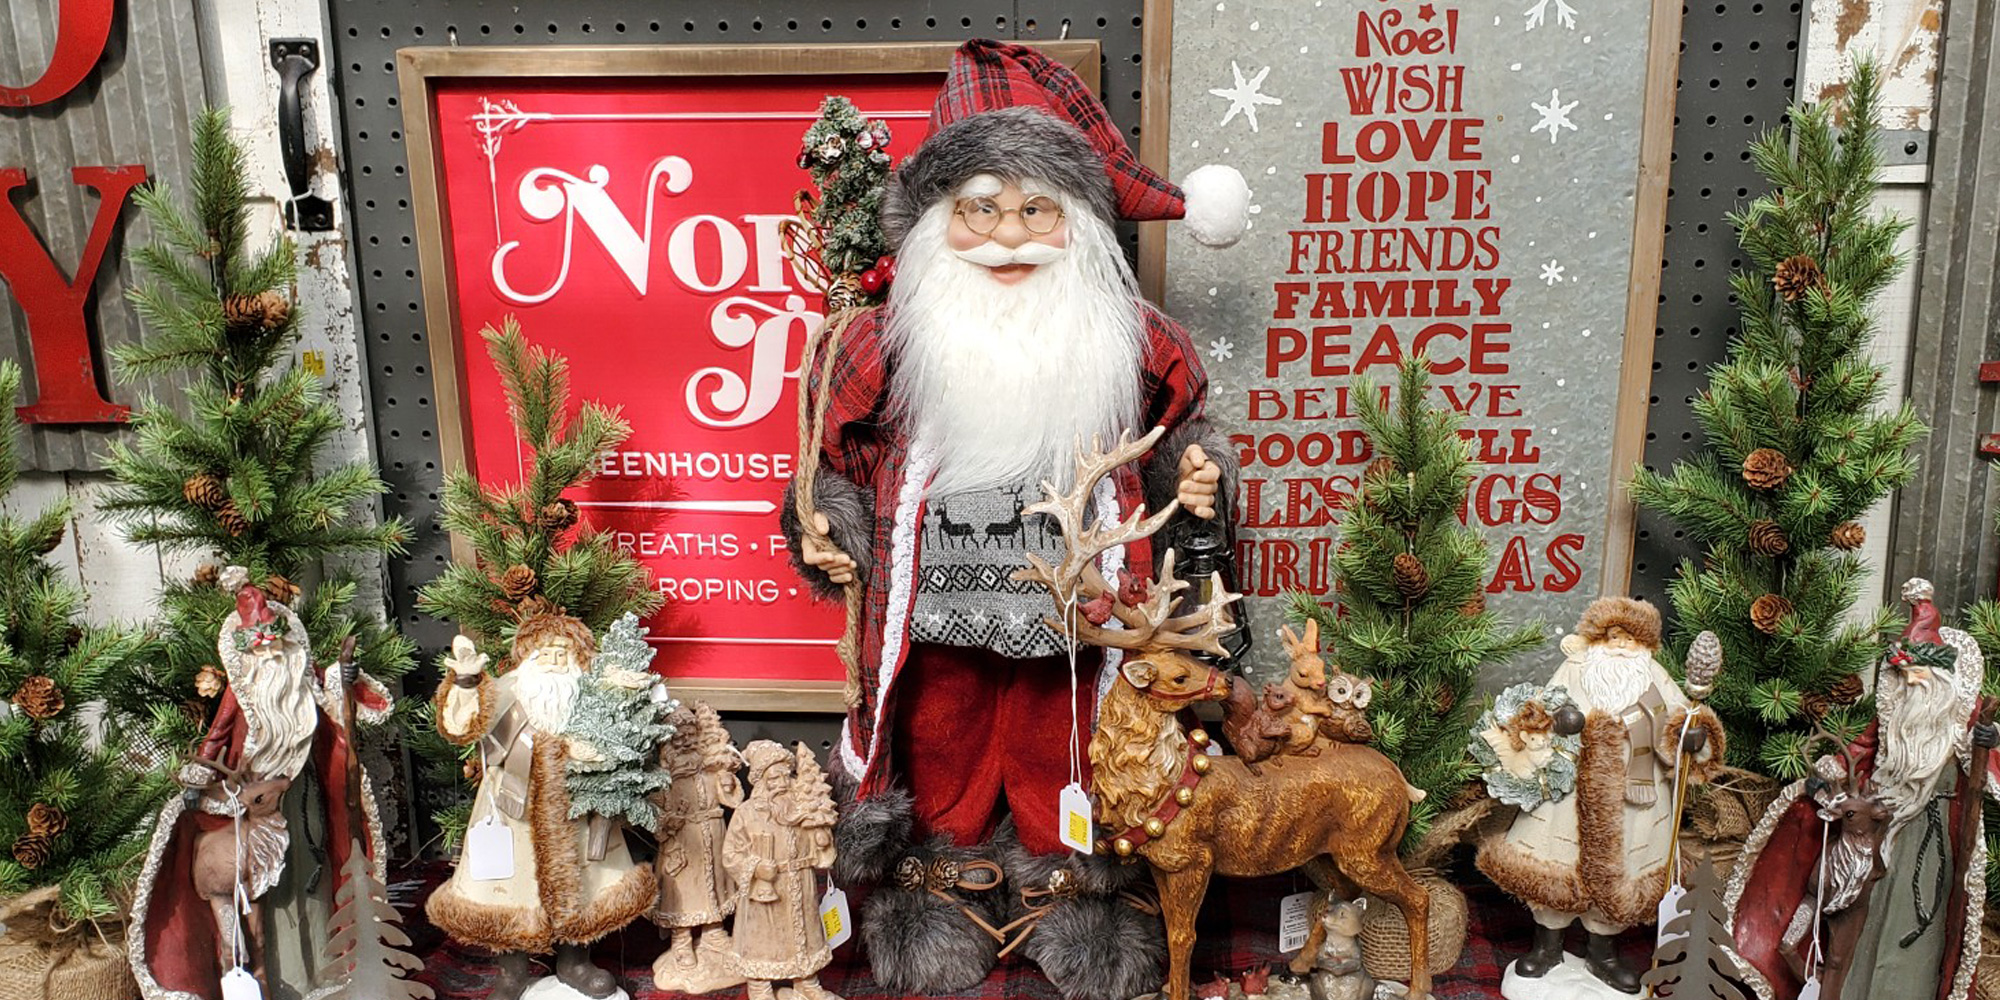 Christmas Decorations, Prints, and Figurines at Down to Earth Living